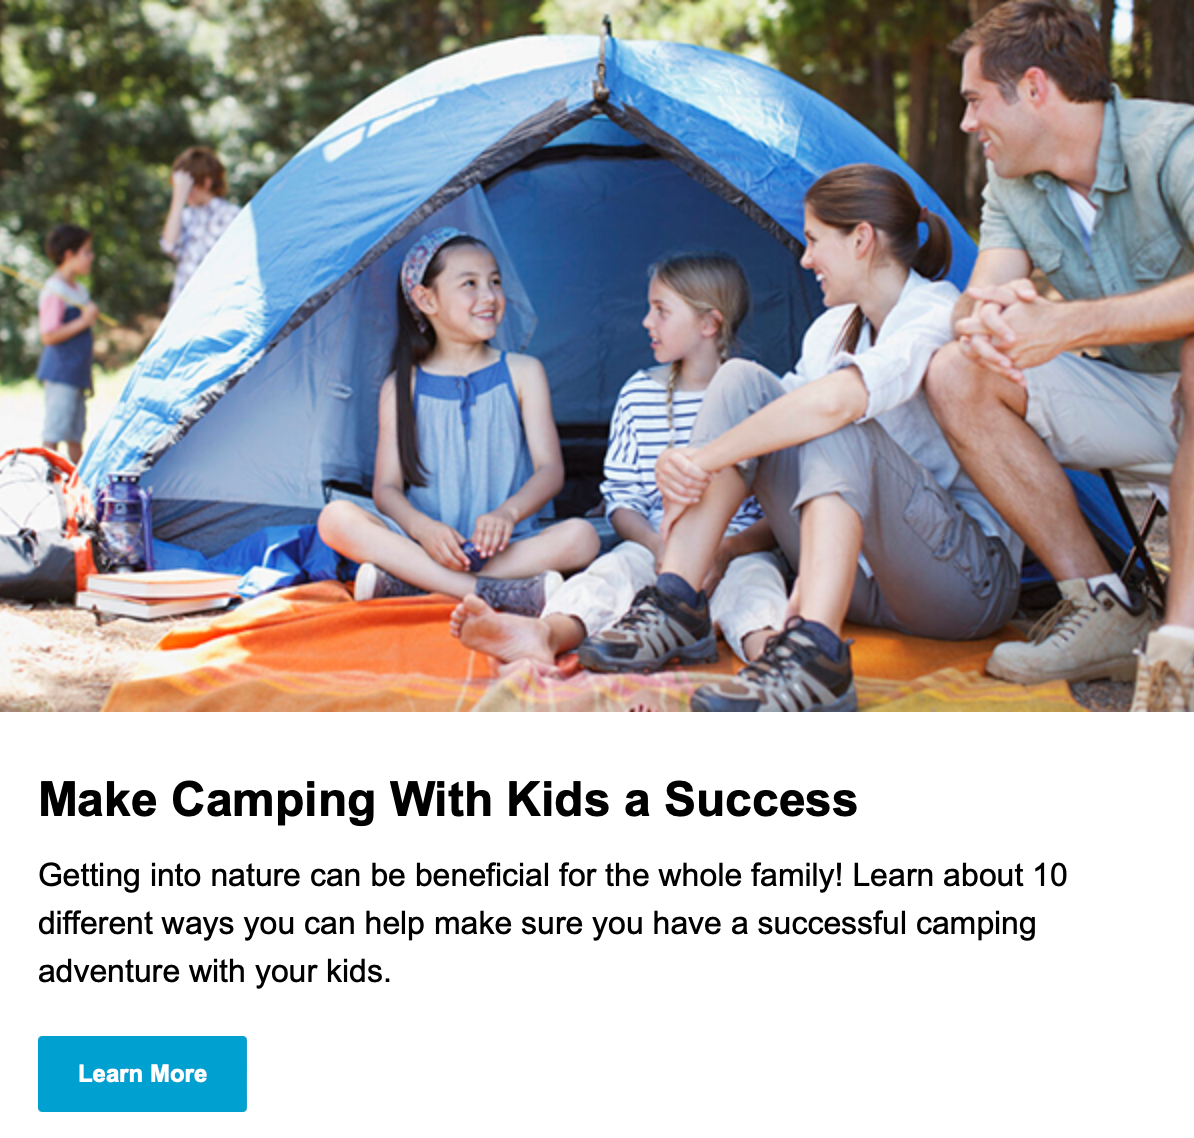 Making Camping with kids a Success